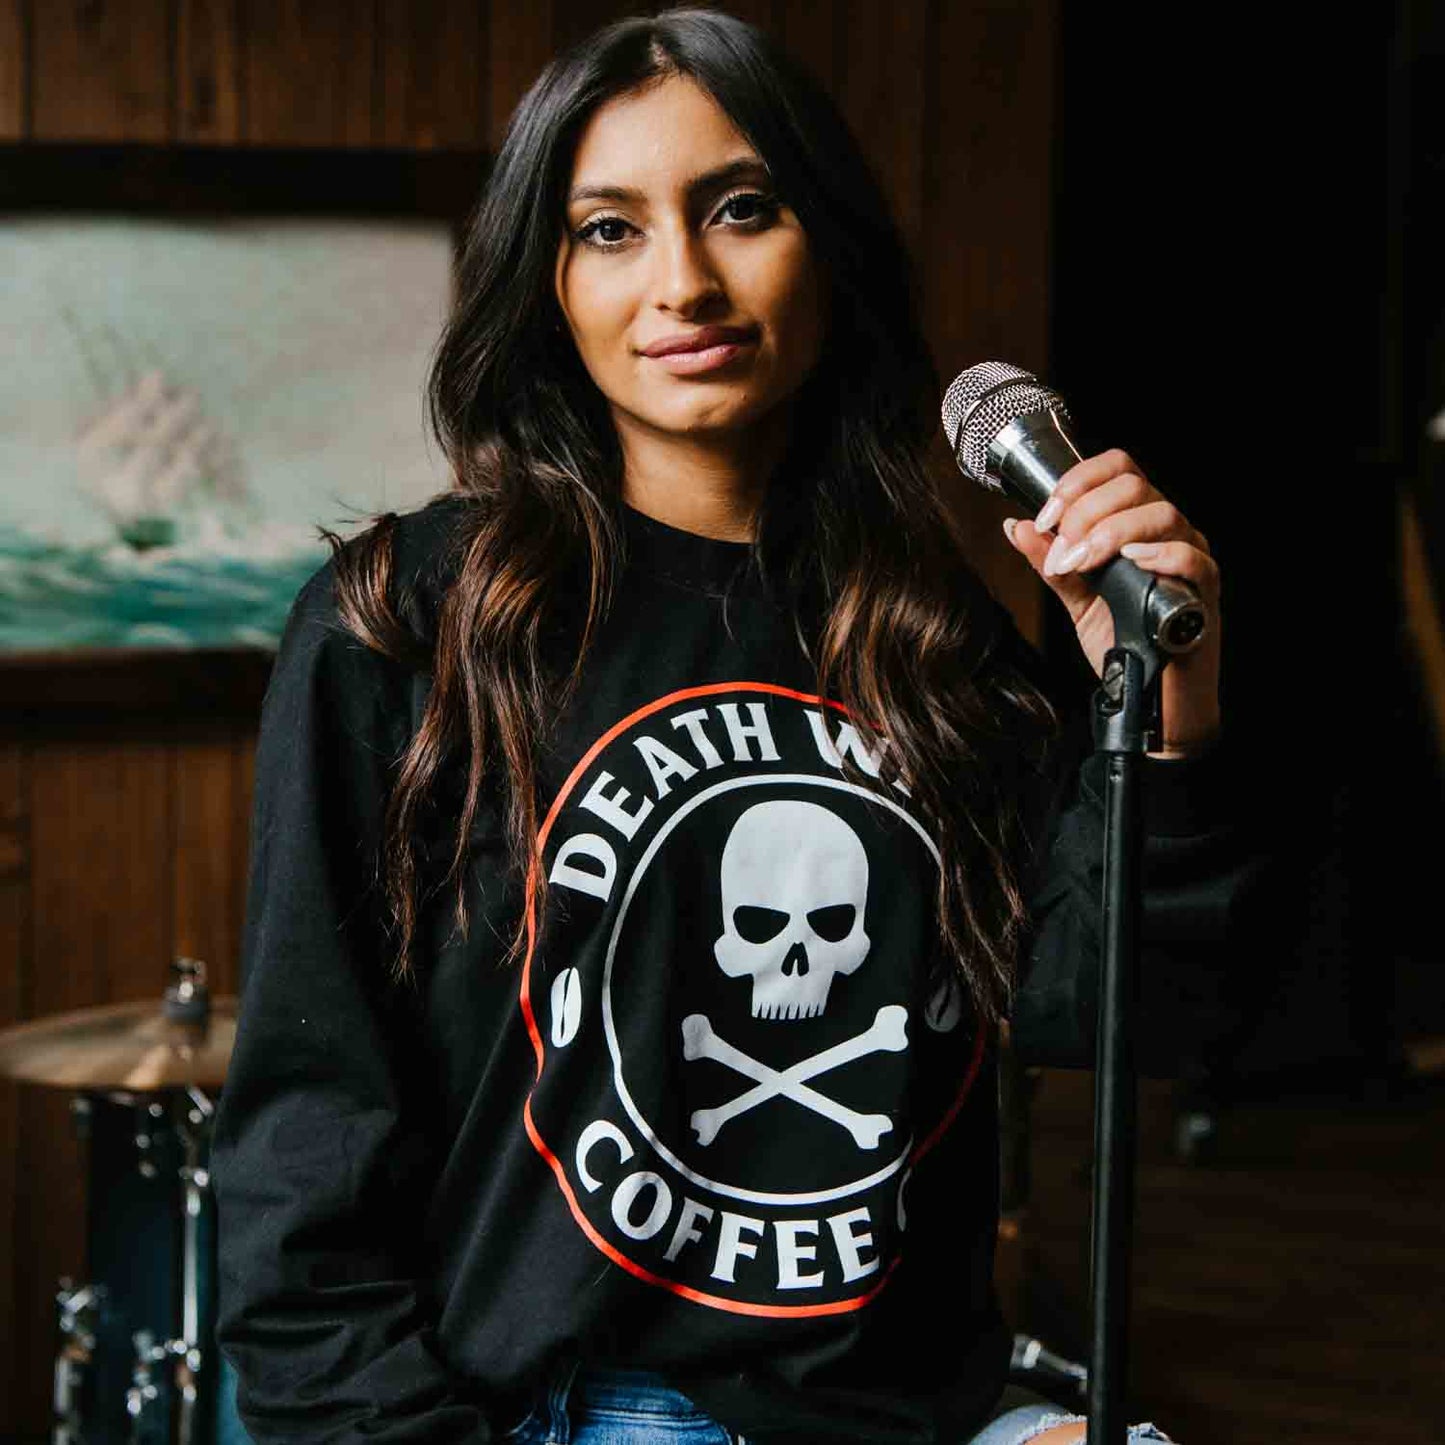 Adjusting the mic in the Death Wish Coffee Classic Logo Long Sleeve Shirt.